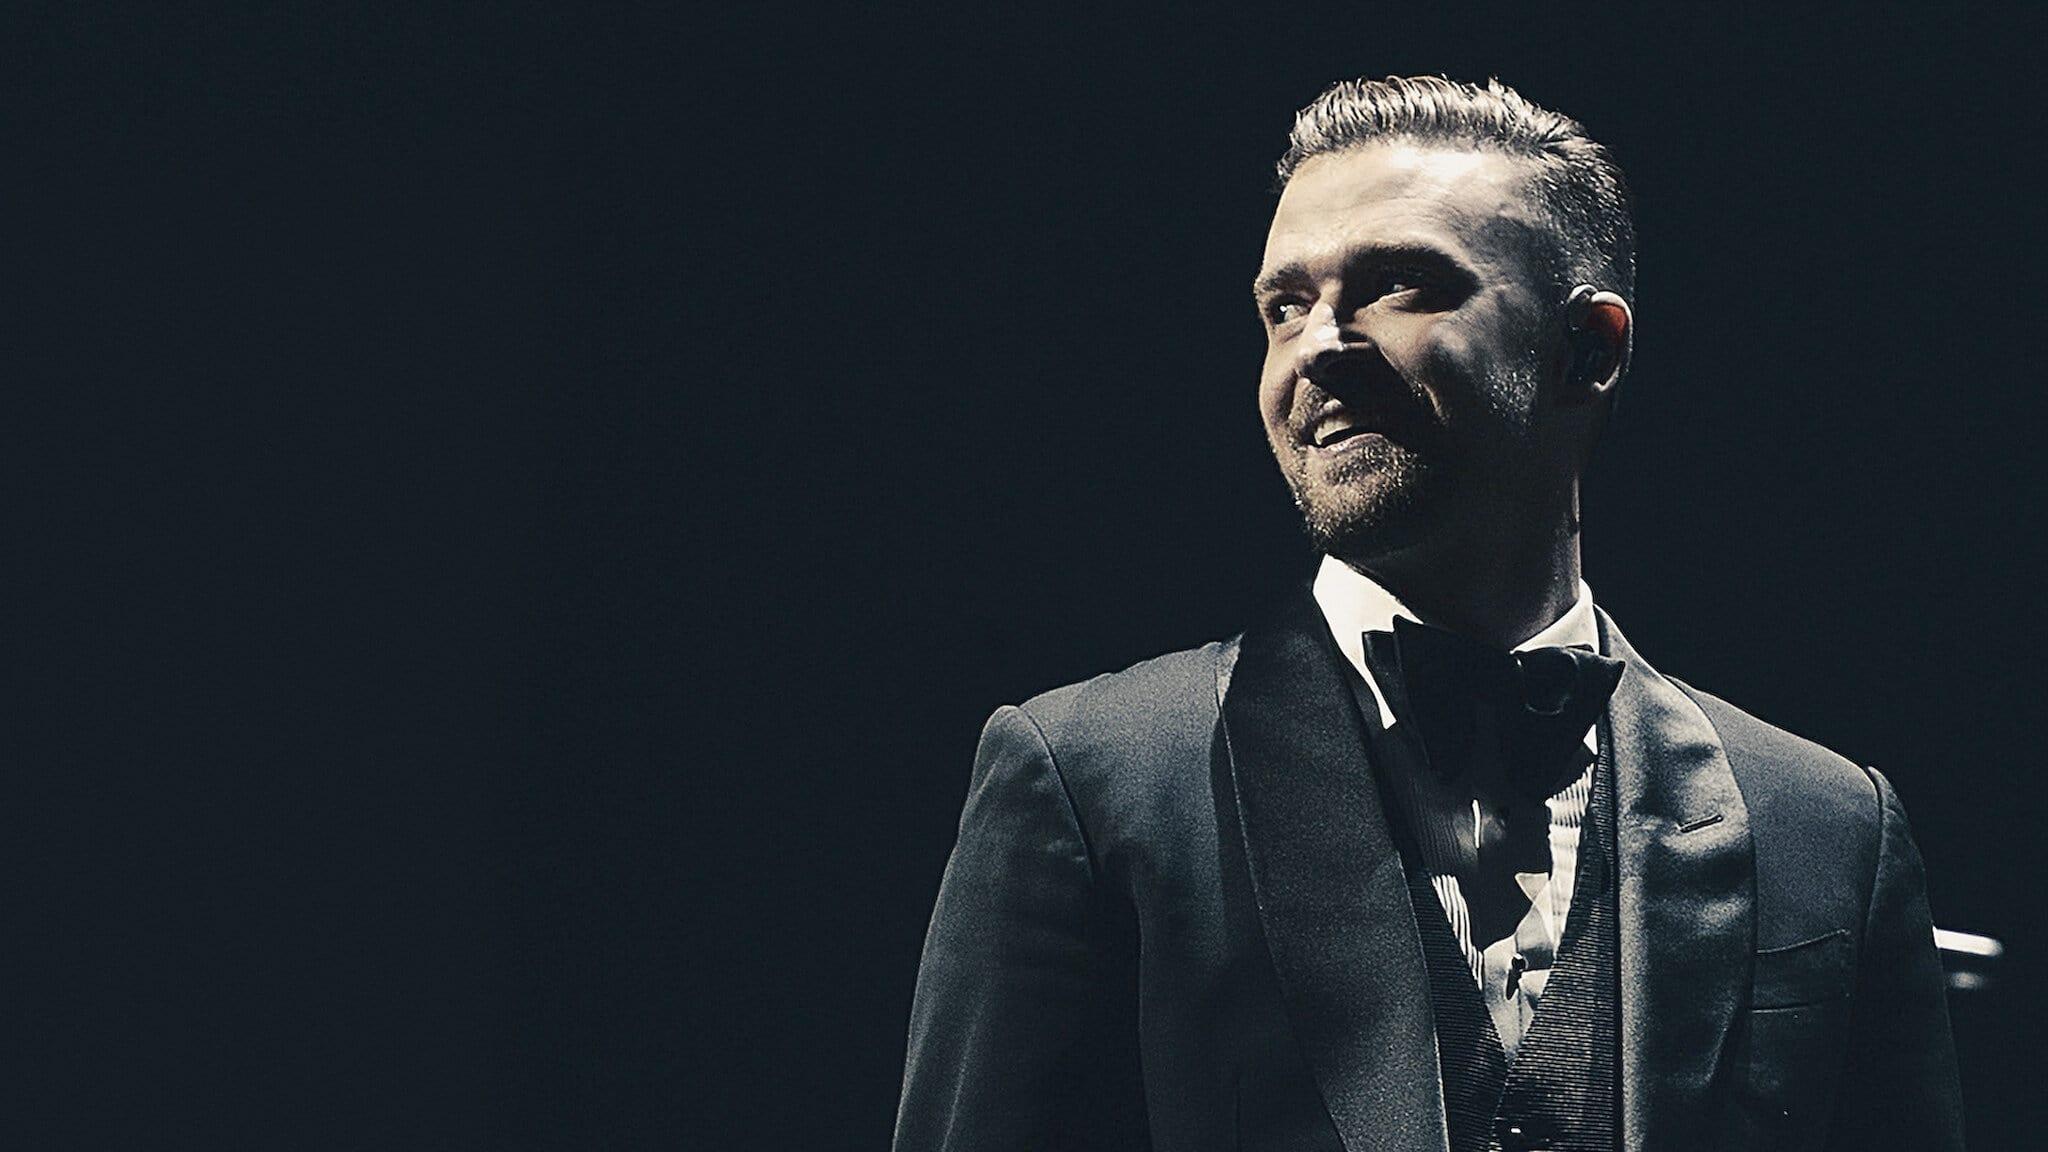 Justin Timberlake + The Tennessee Kids backdrop